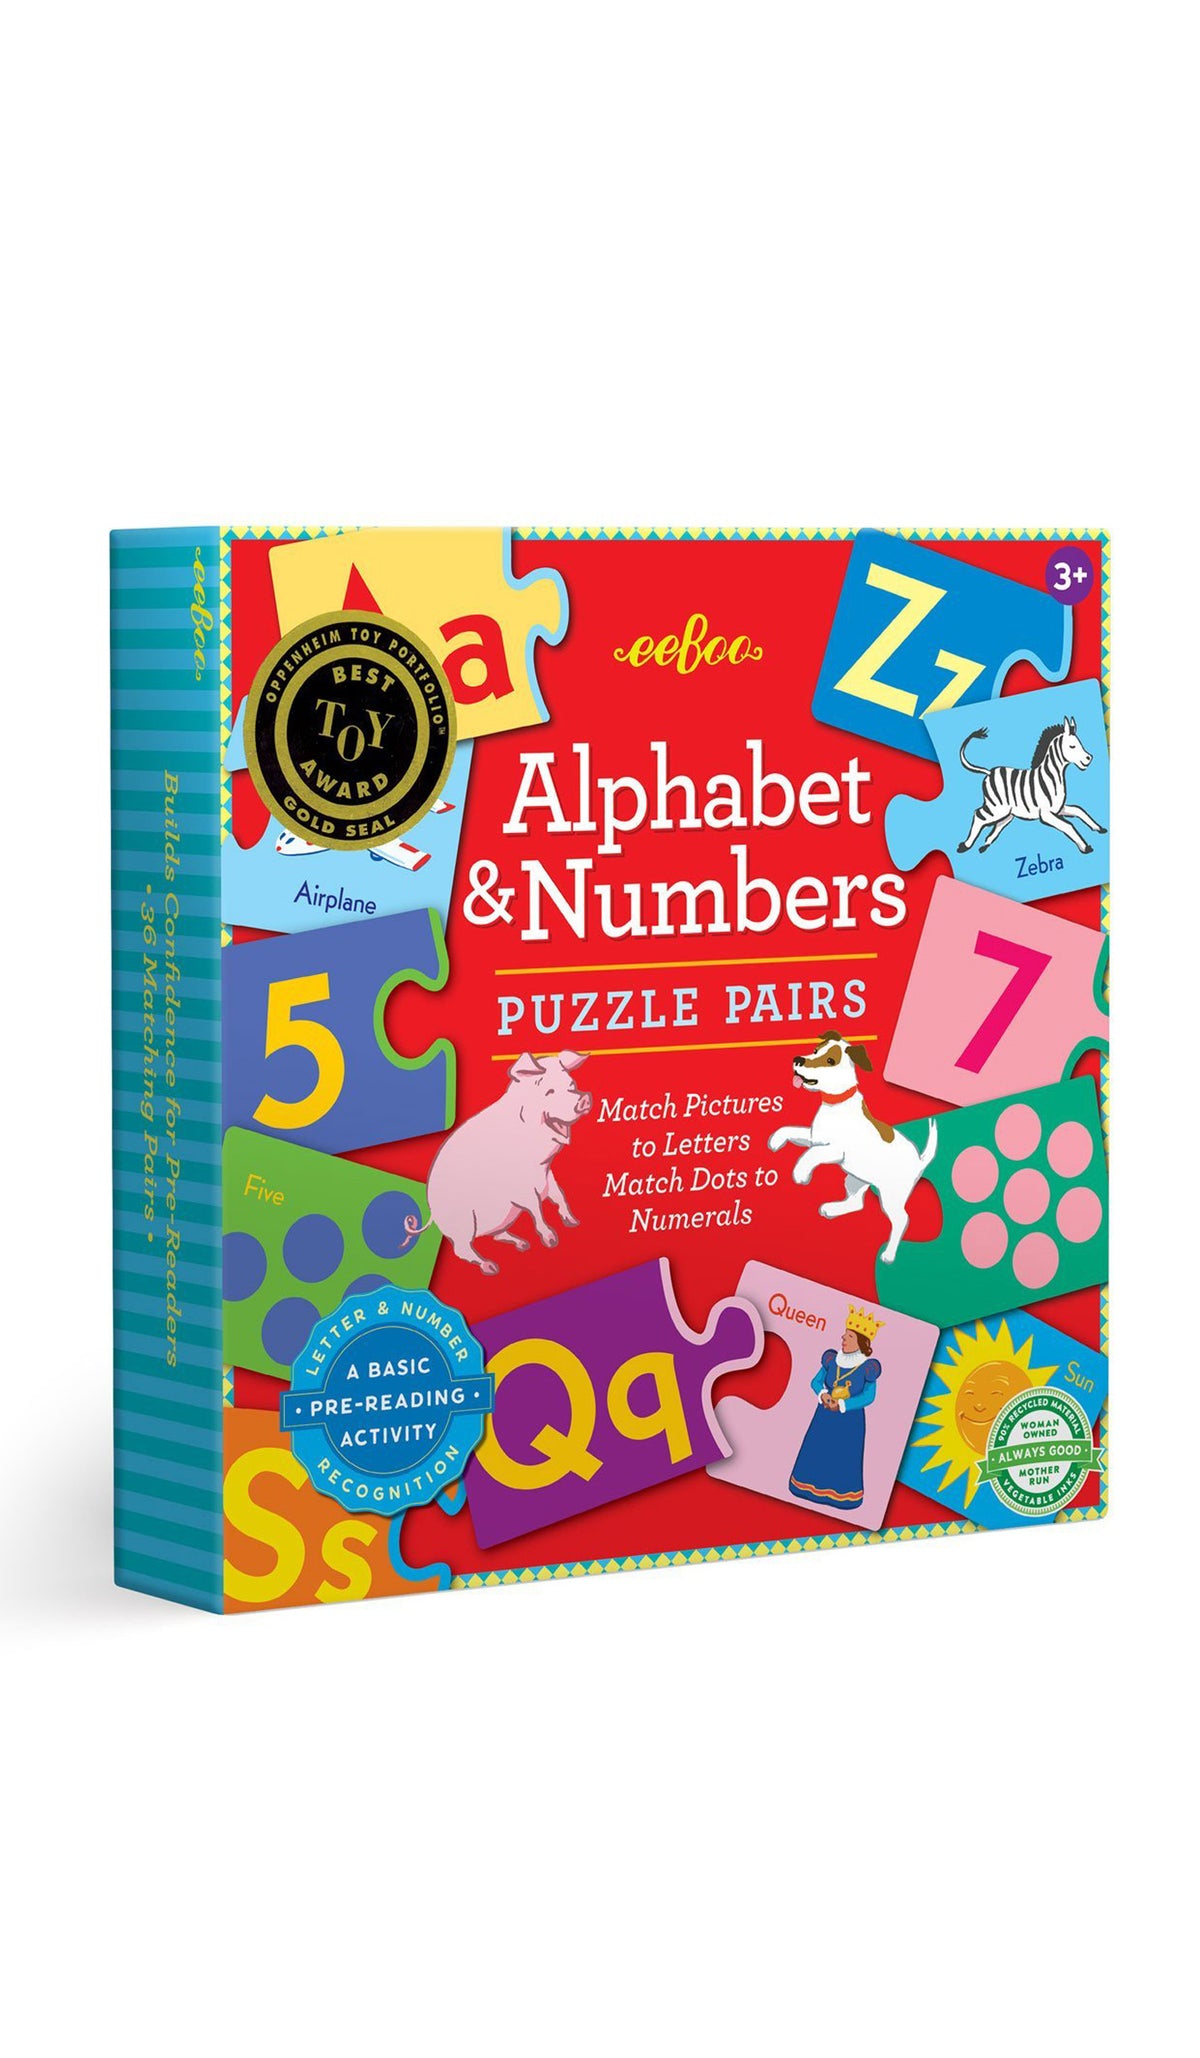 PUZZLE PAIRS: ALPHABET AND NUMBERS